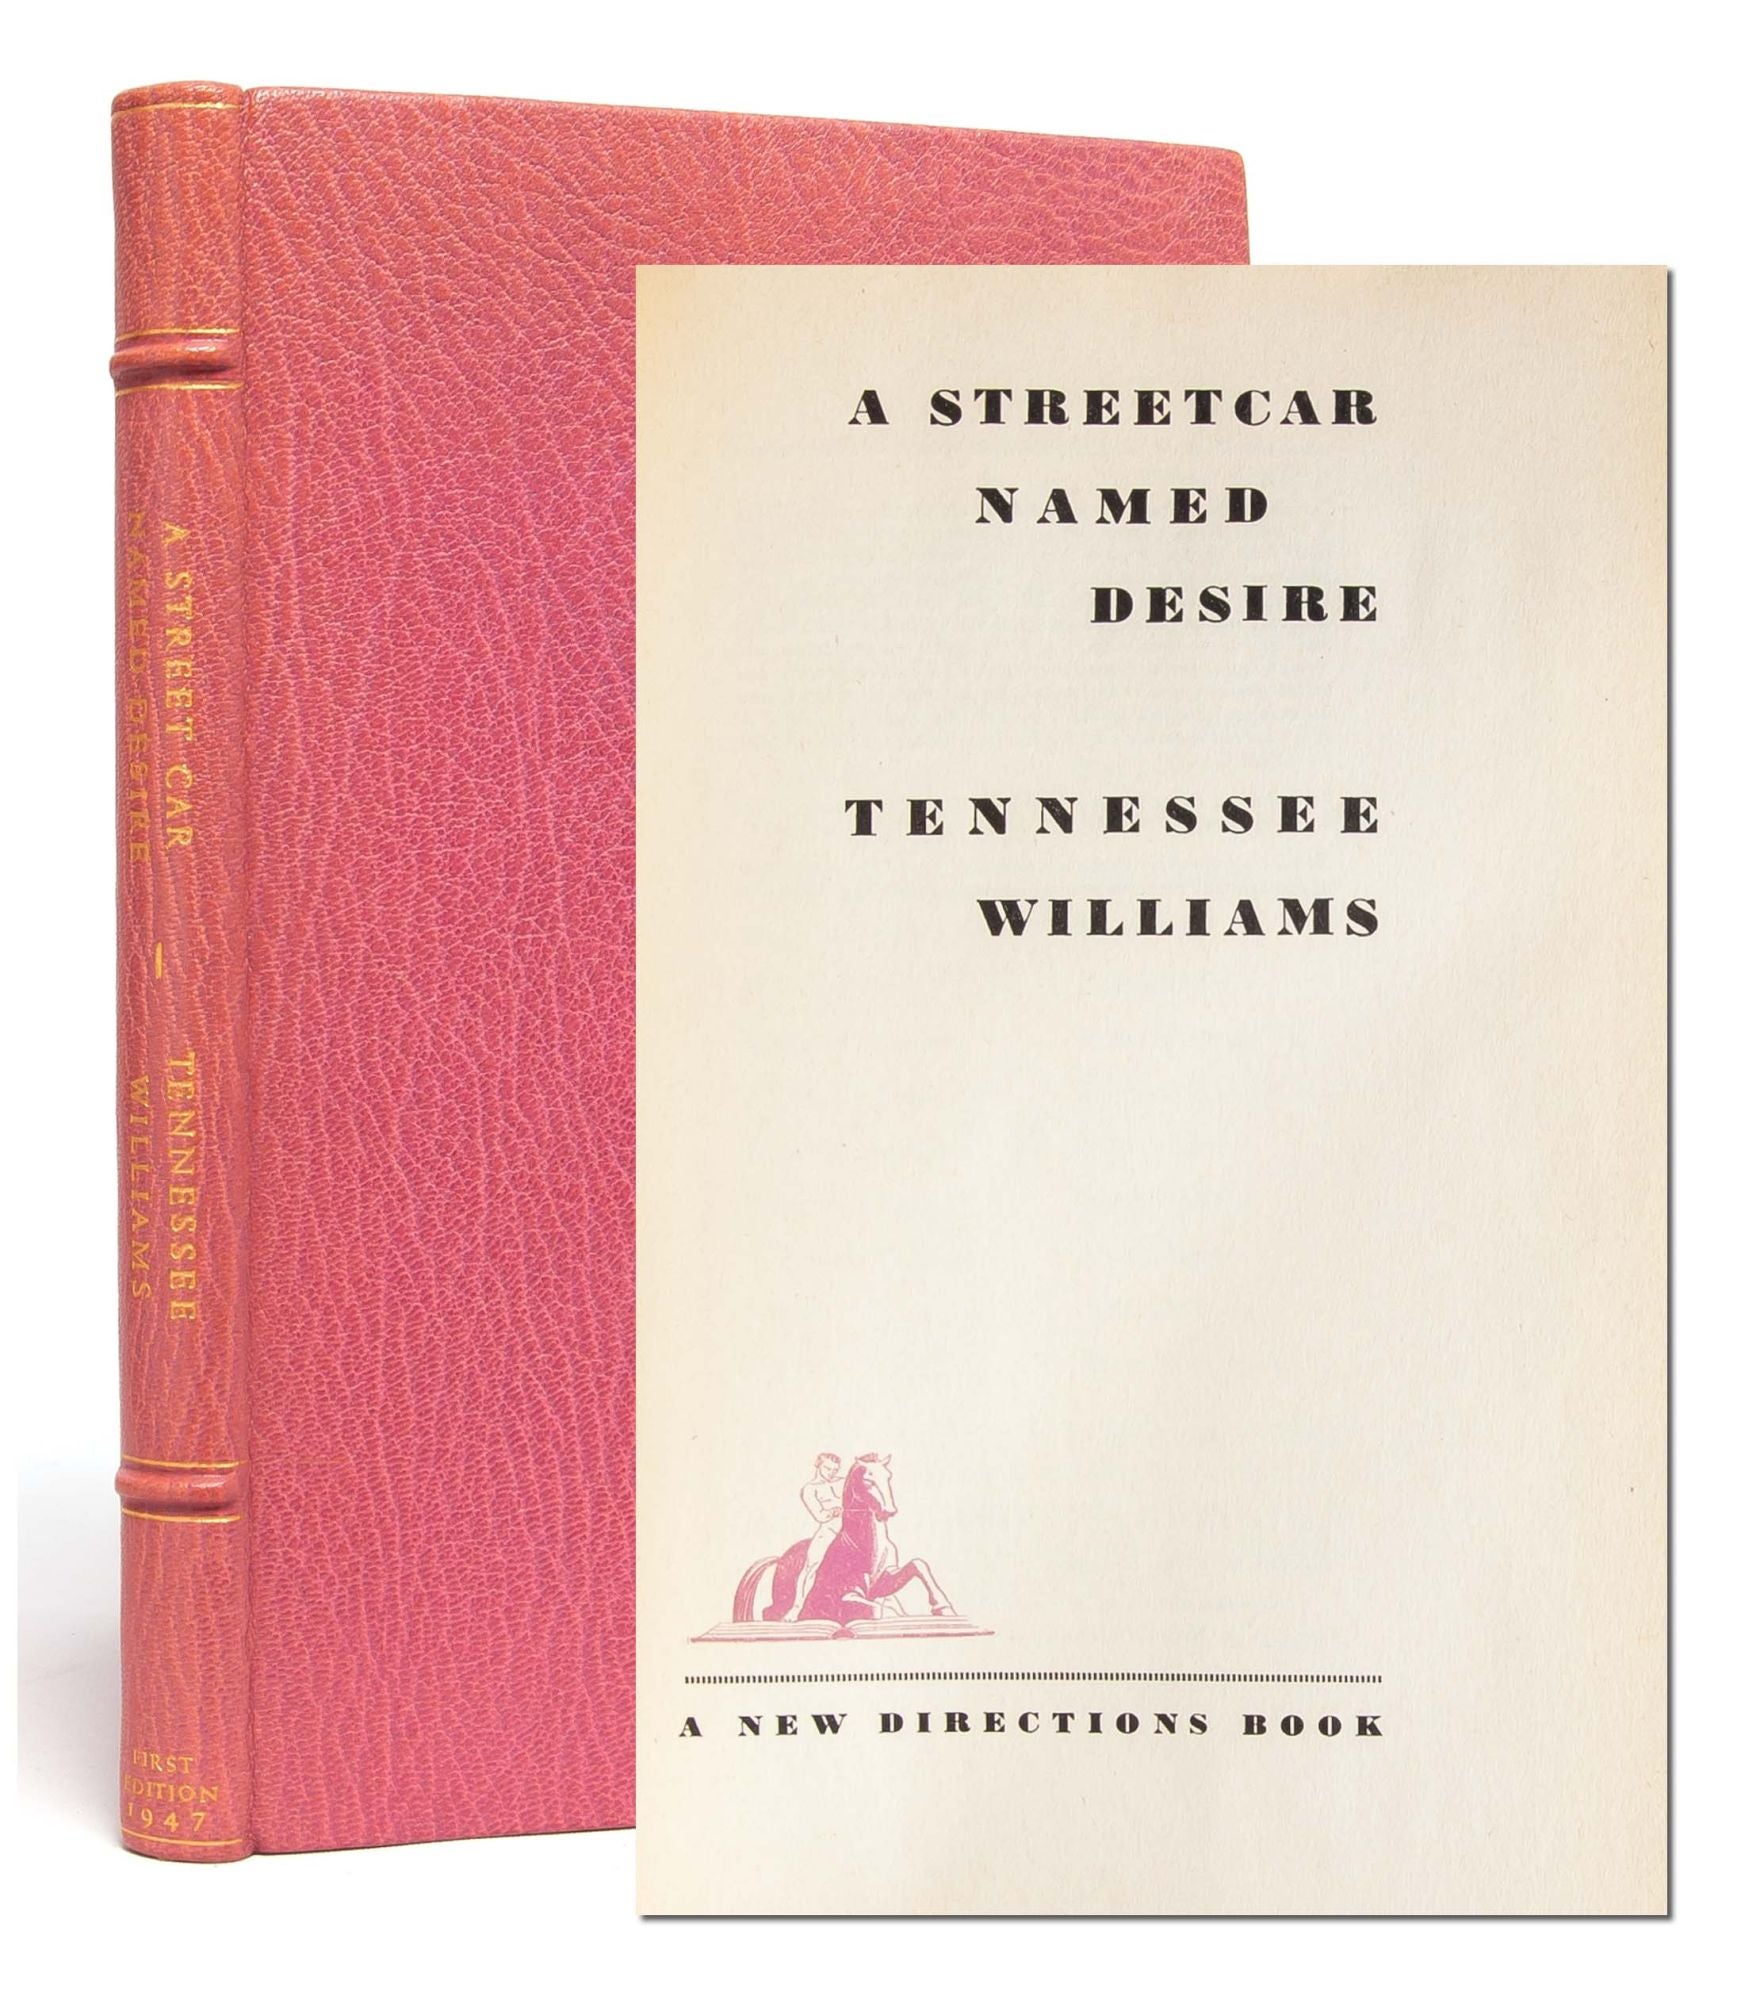 (Item #5572) A Streetcar Named Desire. Tennessee Williams.